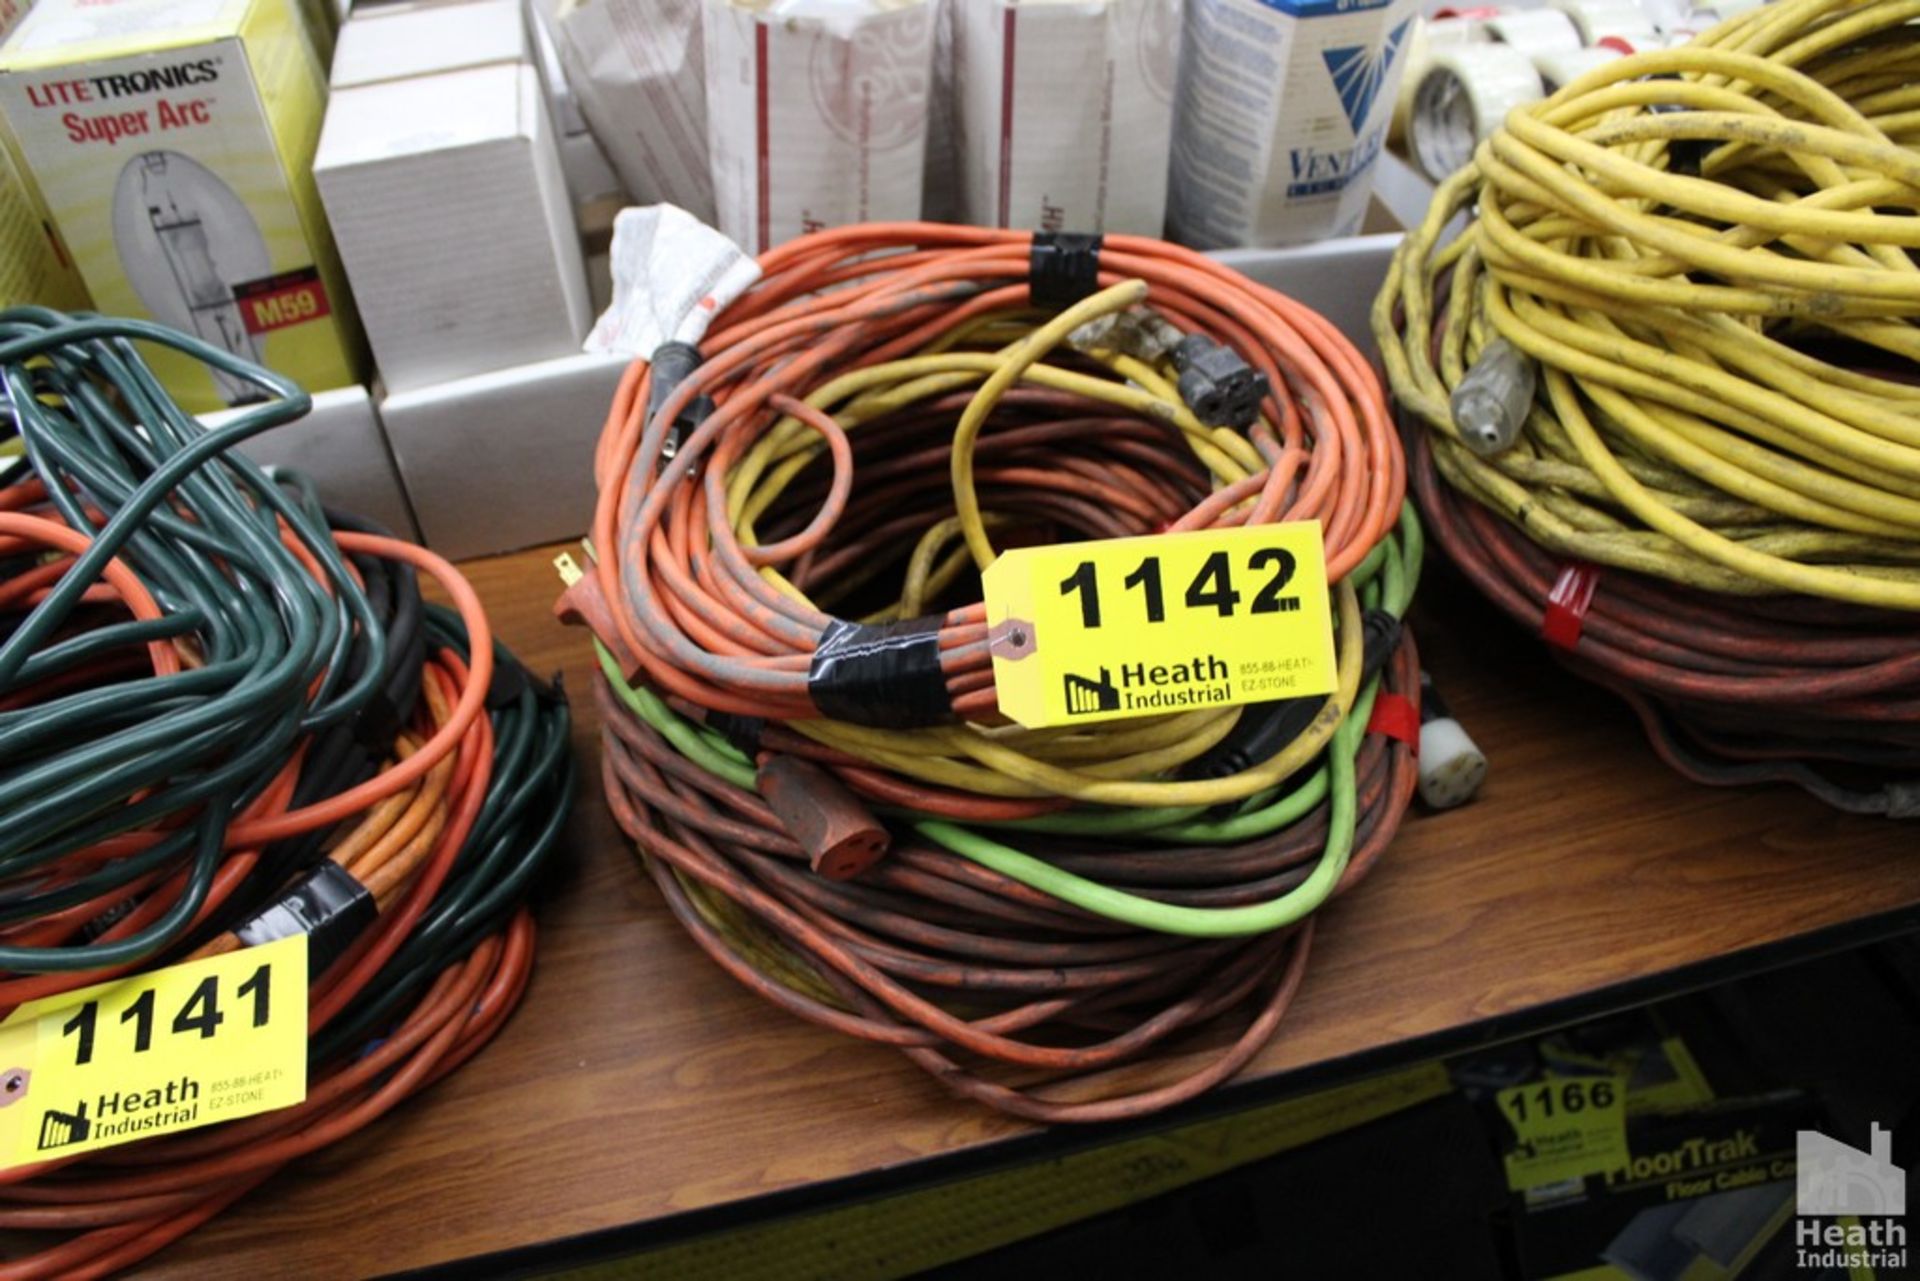 (7) ASSORTED ELECTRICAL EXTENSION CORDS